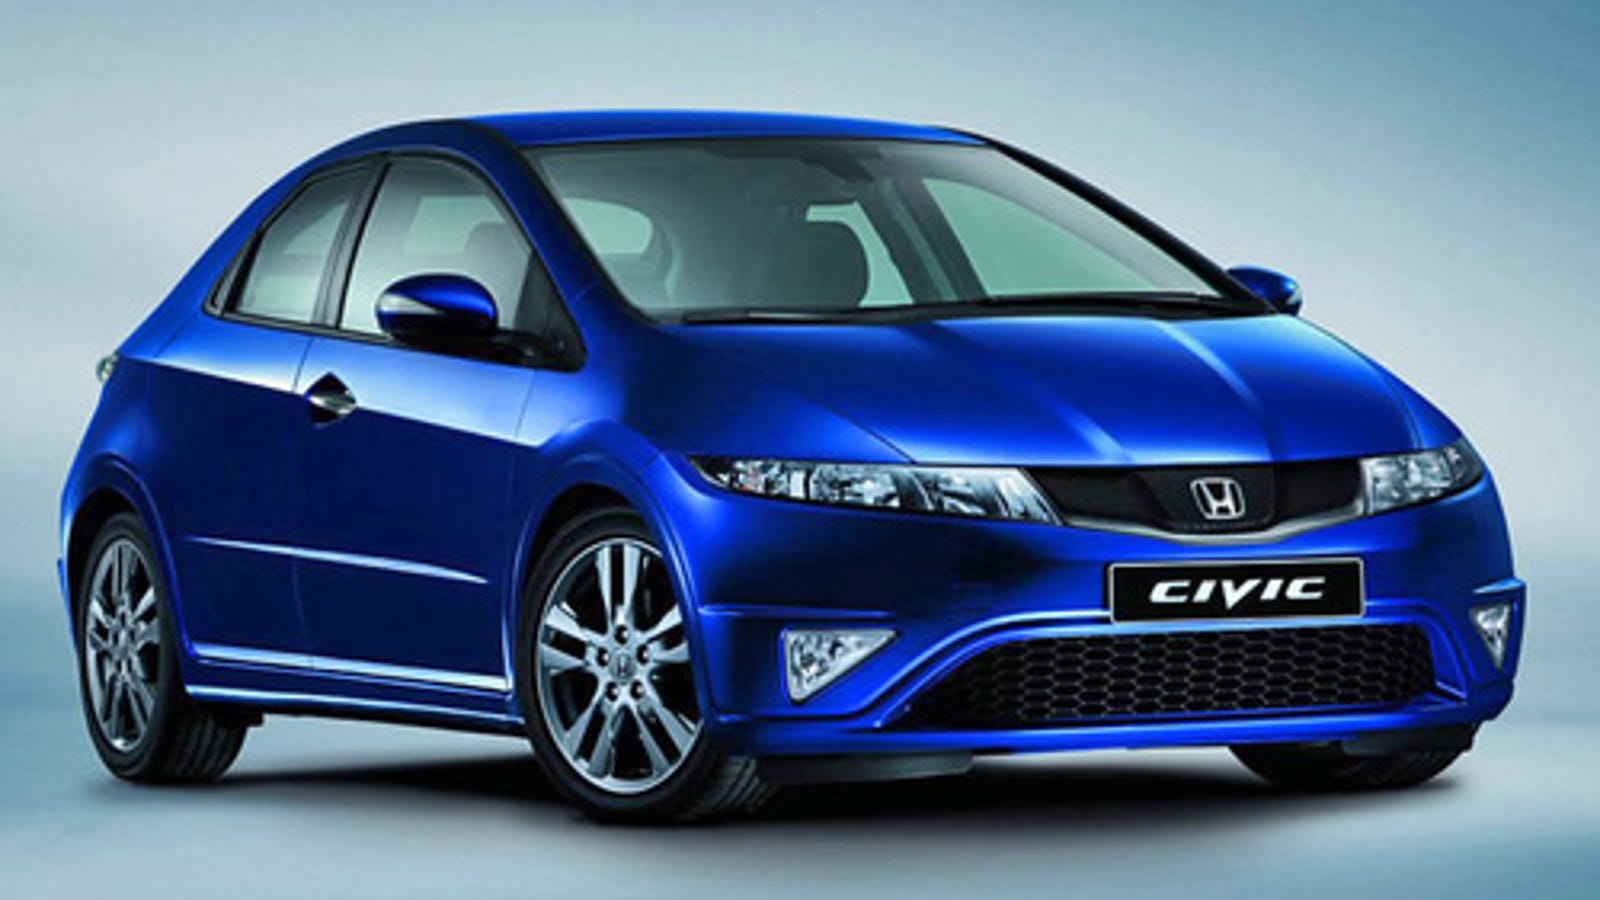 UK Honda Civic Si FiveDoor Look Sportier Without The